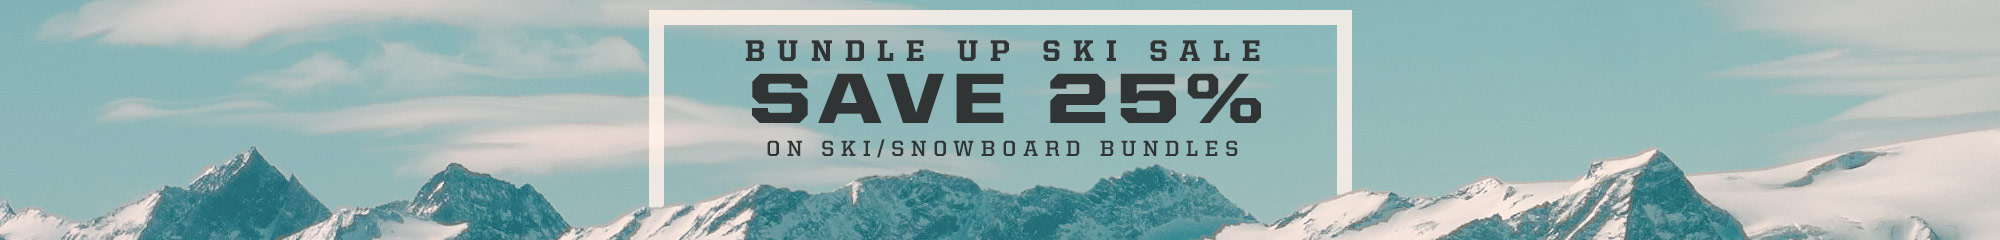 Bundle Up and Save 25% on Ski and Snowboard Gear.